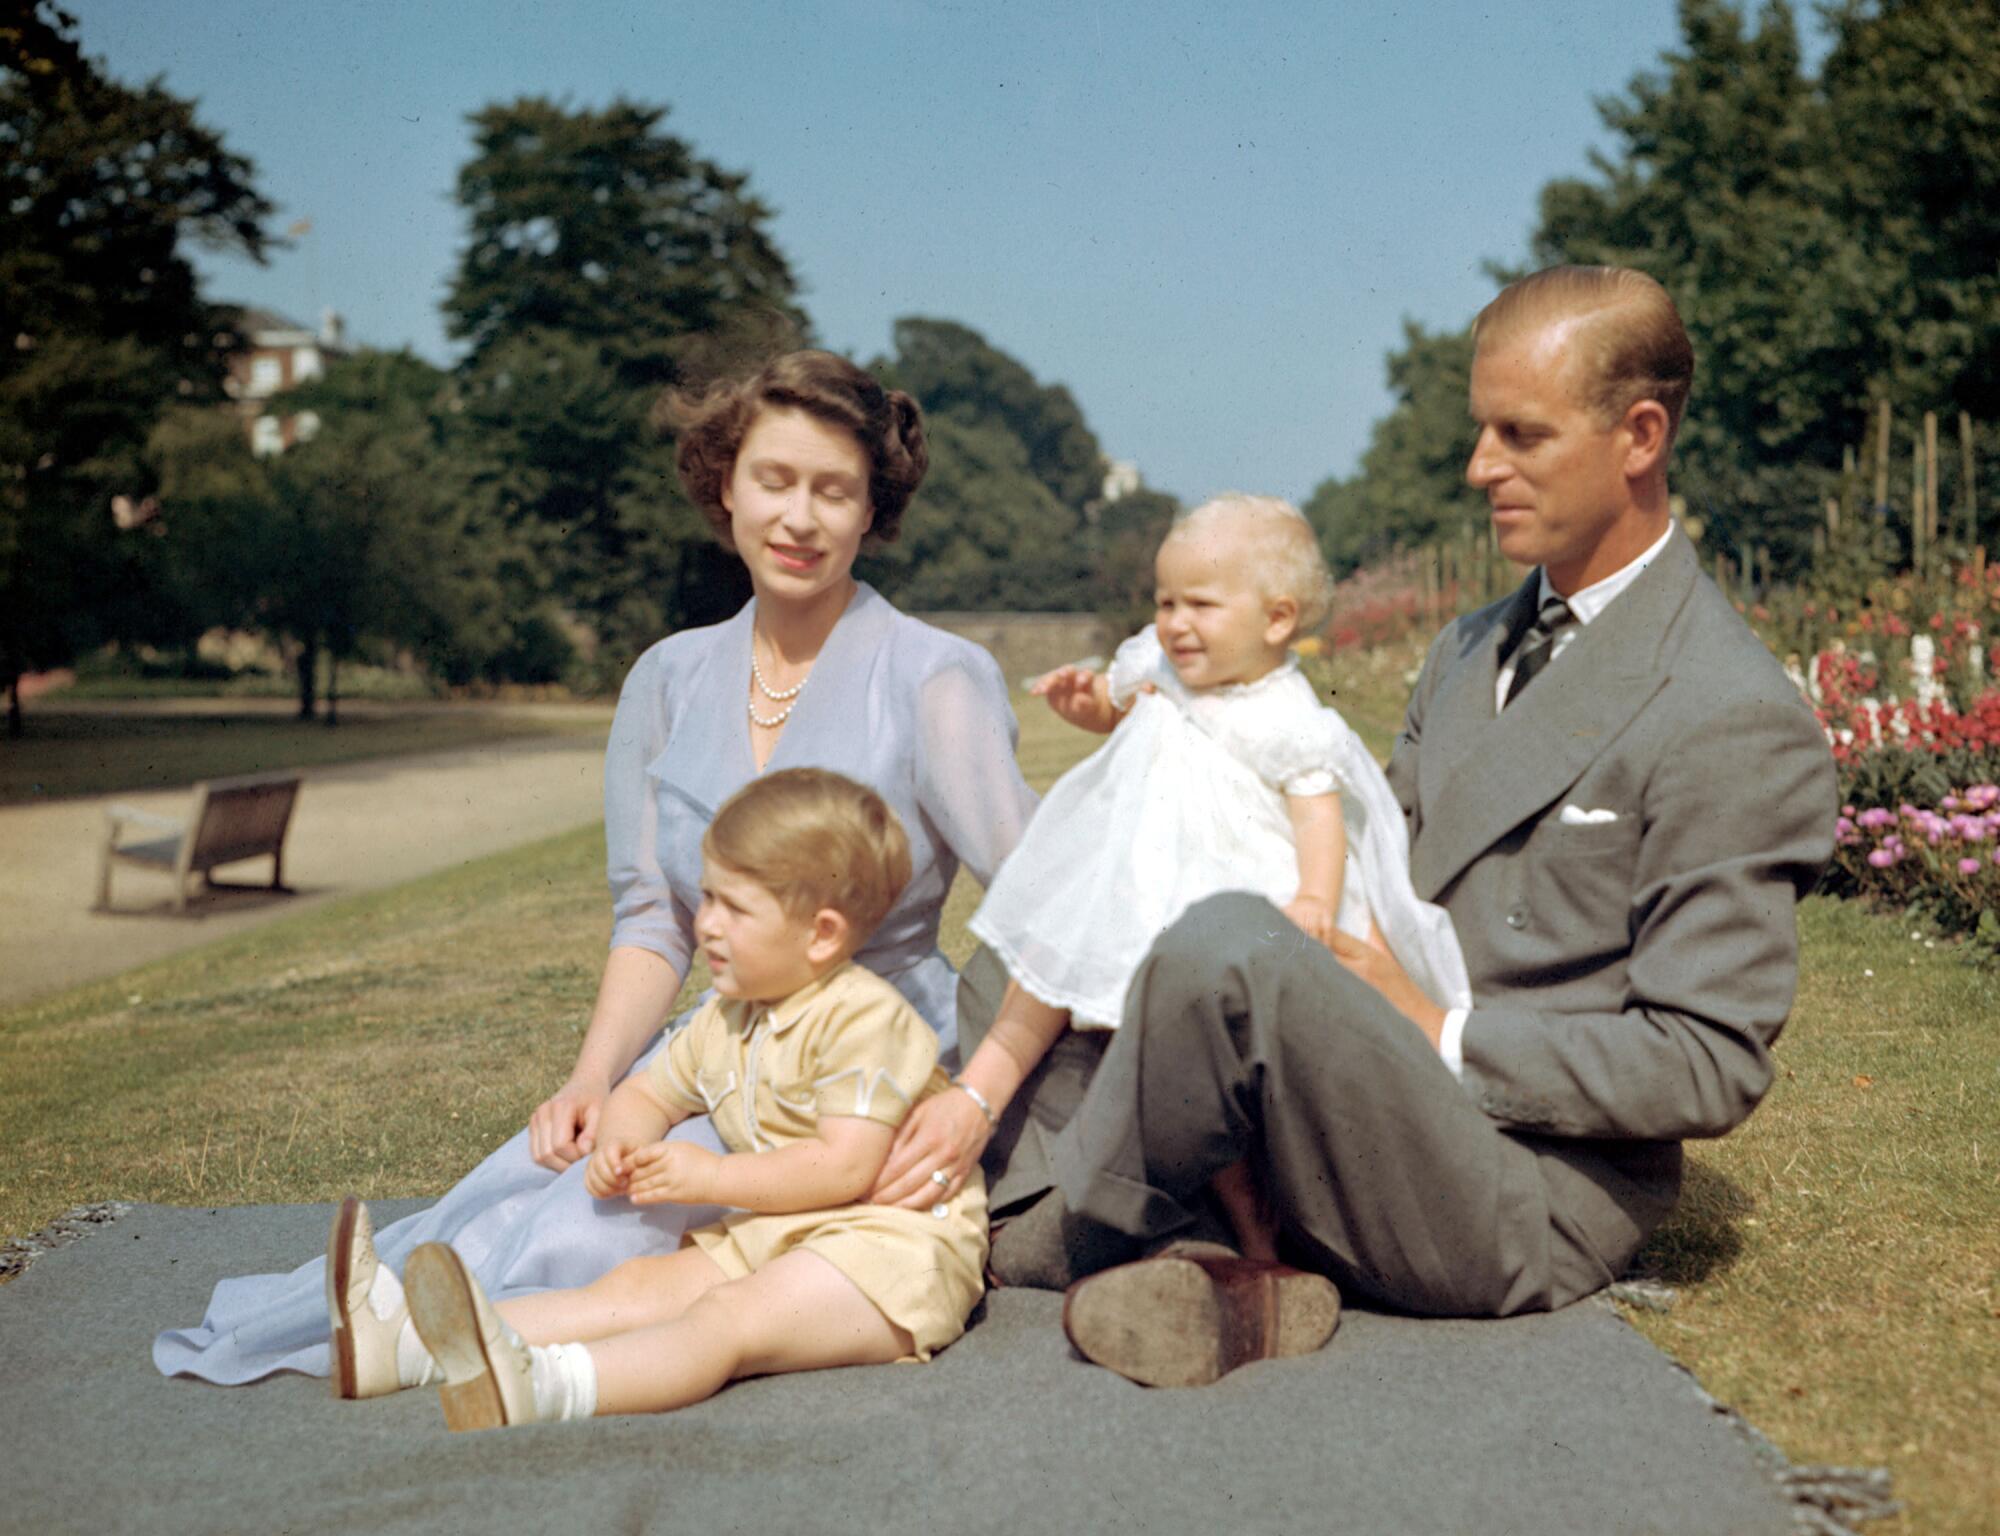 The royal family sits outside in 1951 with two small children